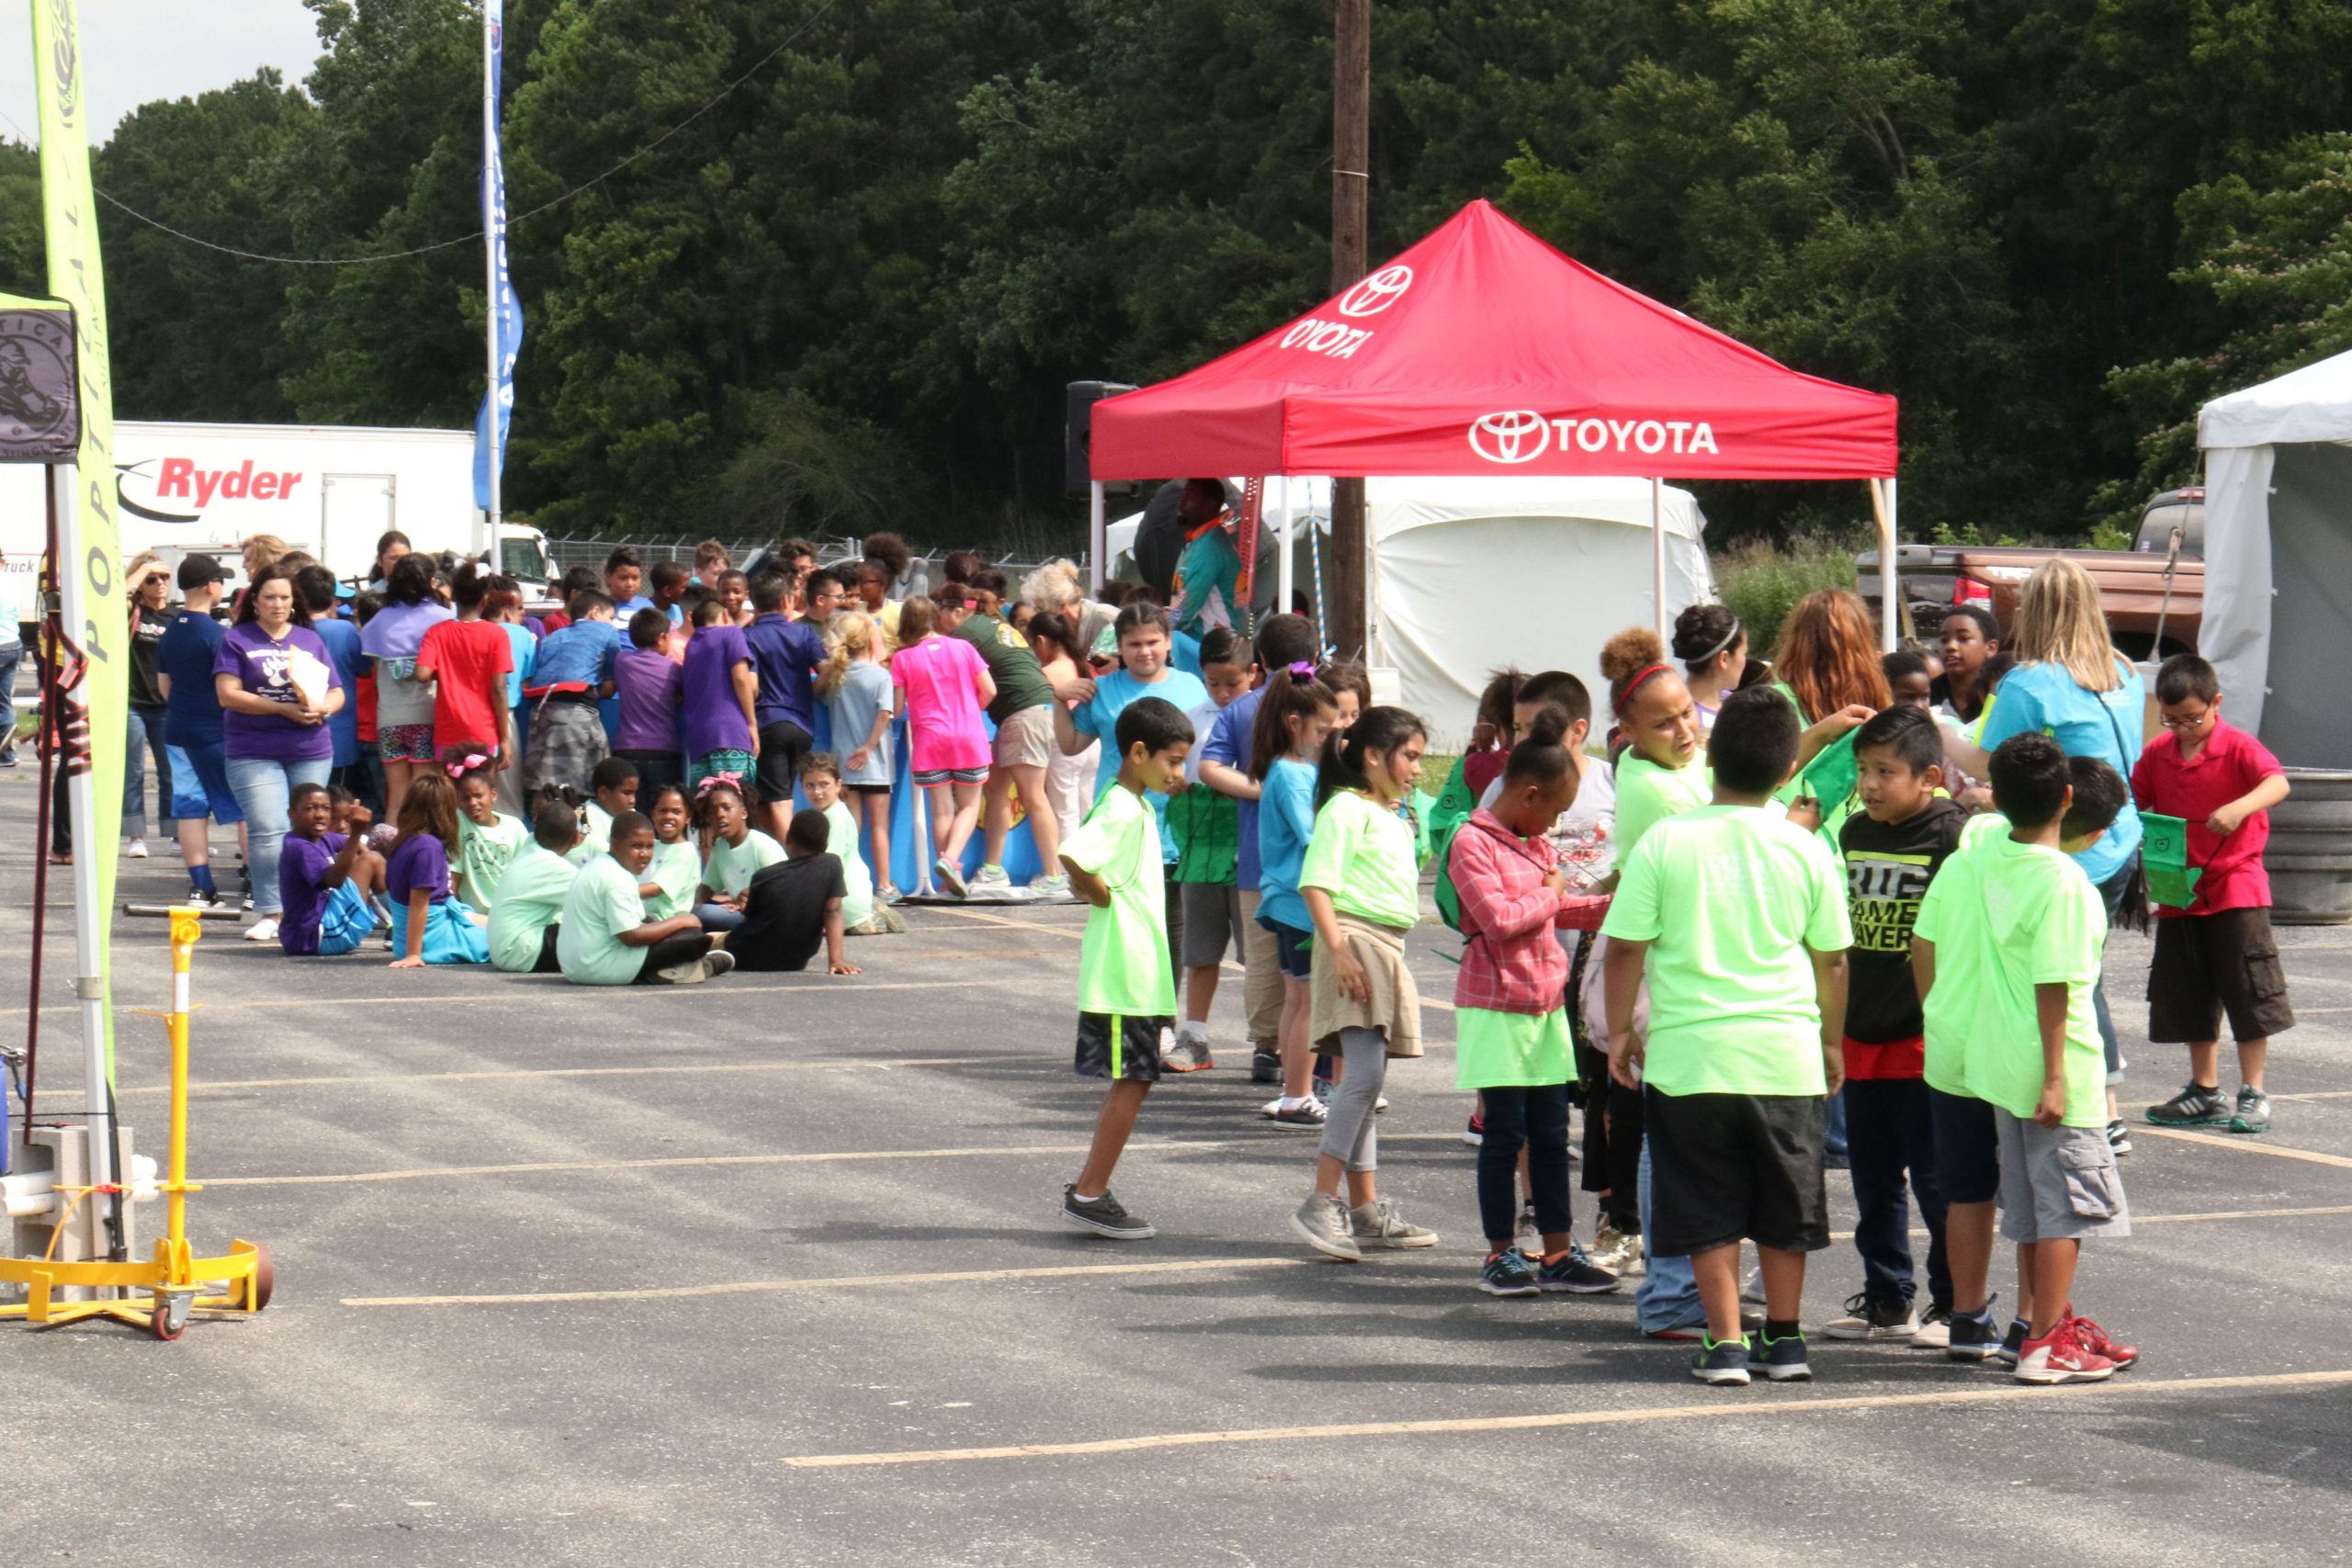 Toyota's support of Casting Kids allowed students to enjoy a day of casting and learning about conservation. 